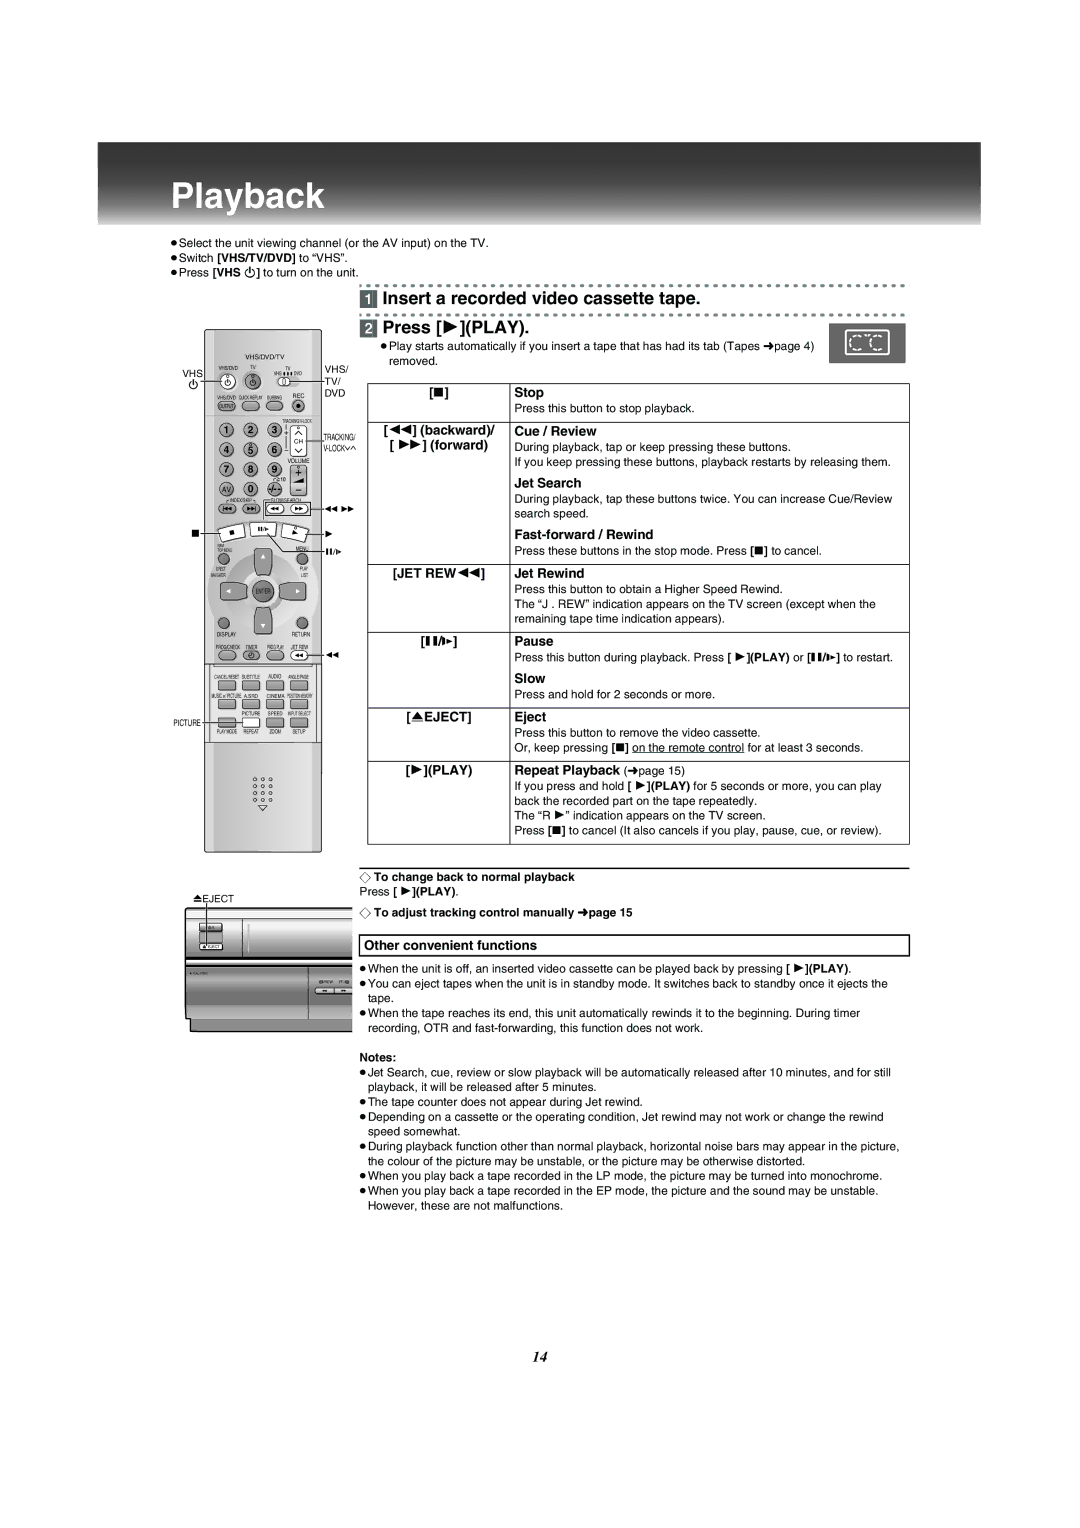 Panasonic VP-31GN manual Playback, Insert a recorded video cassette tape, Press 1PLAY 